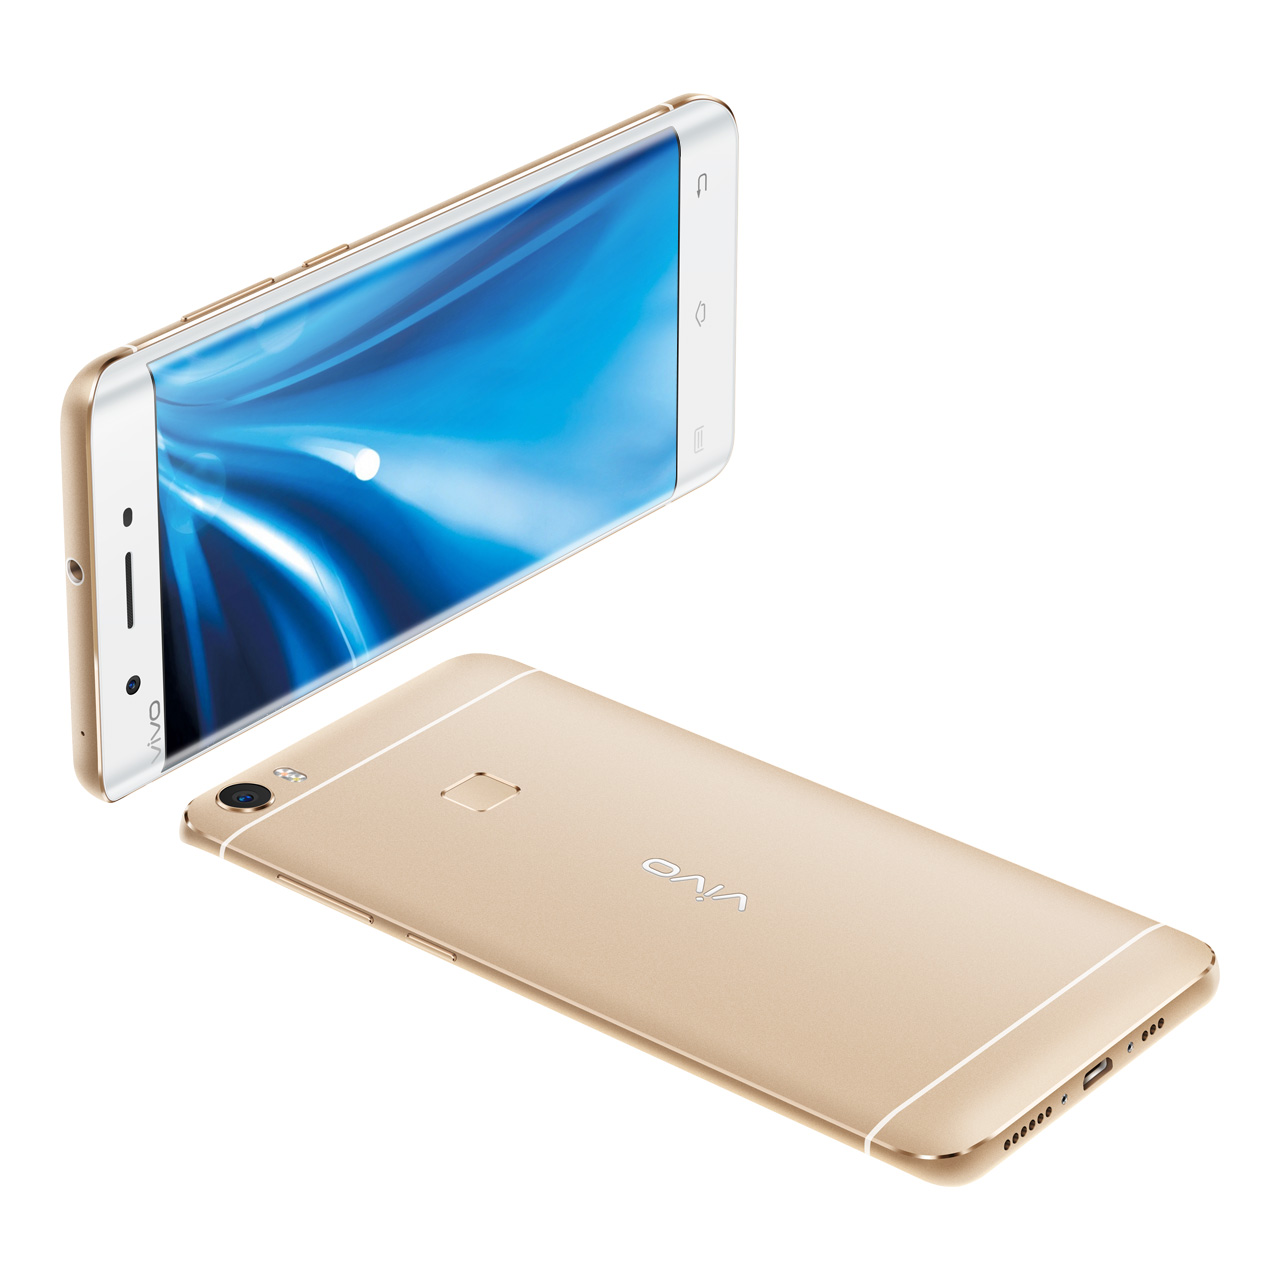 vivo Xplay5 goes official with dual-curved display